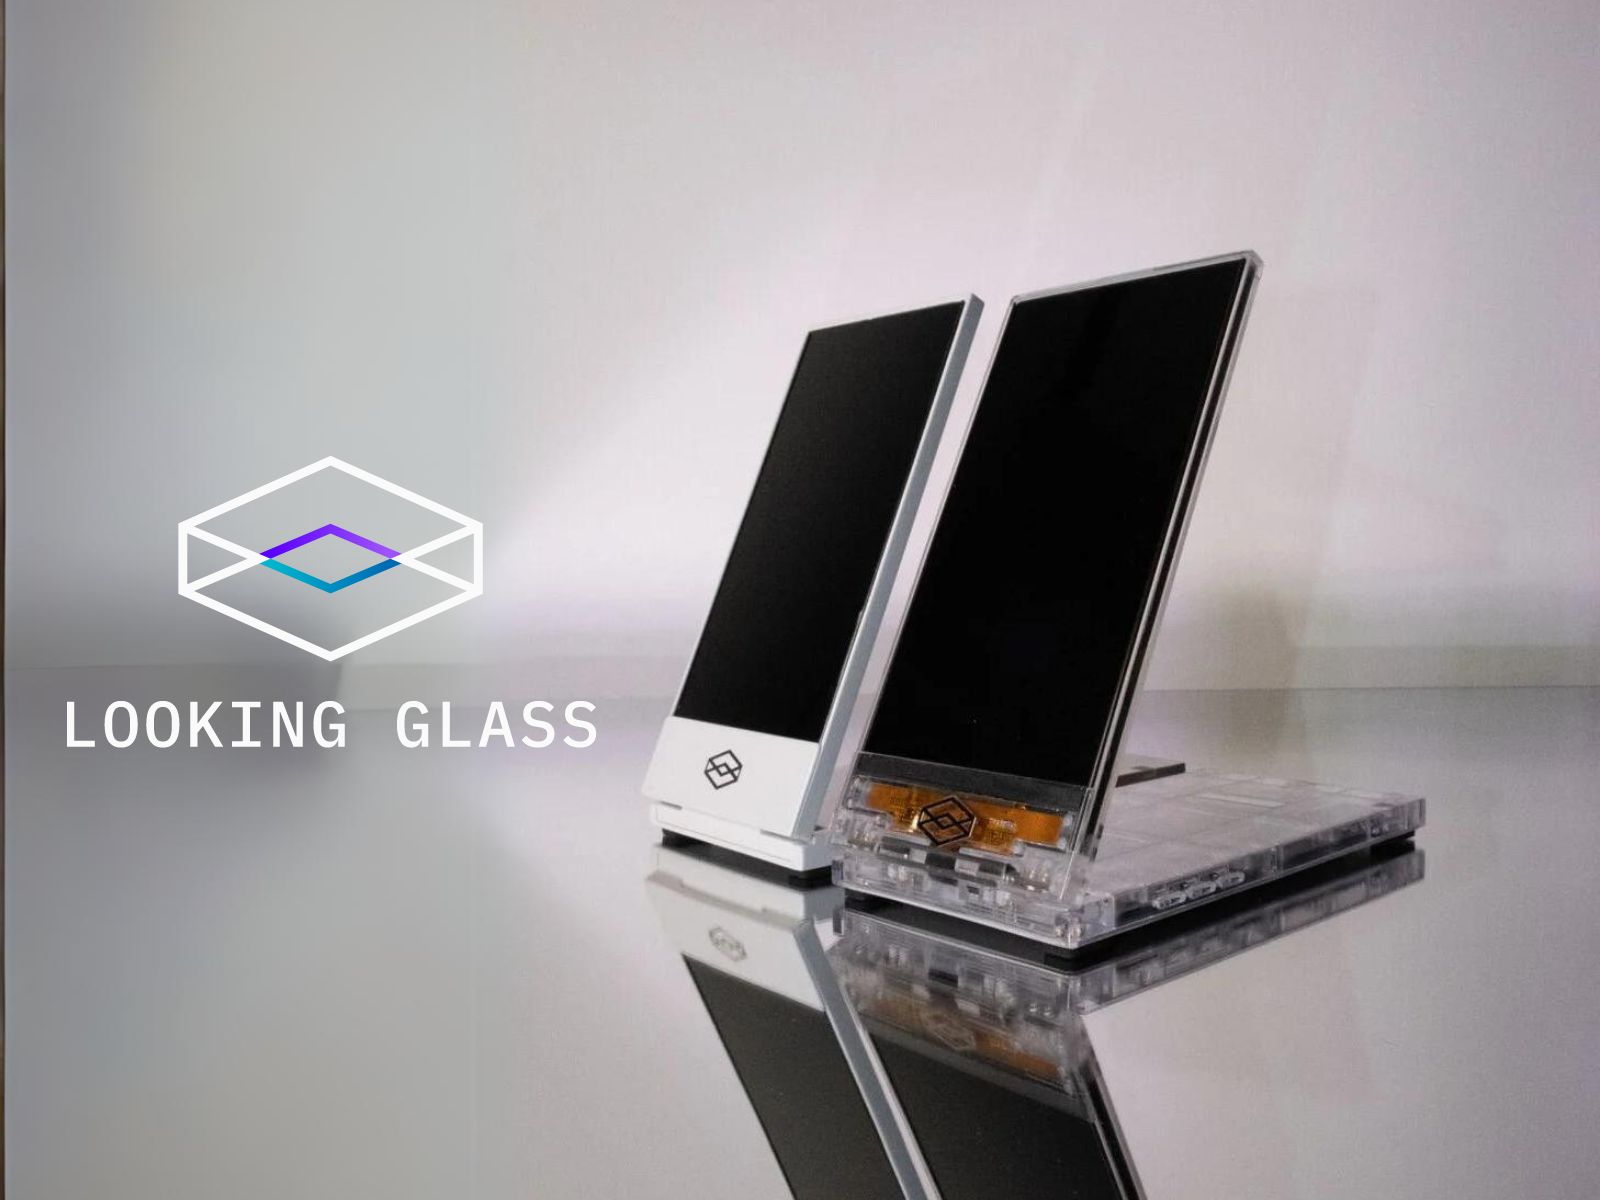 Palm-sized holographic display Looking Glass Go allows viewing 3D images headset-free